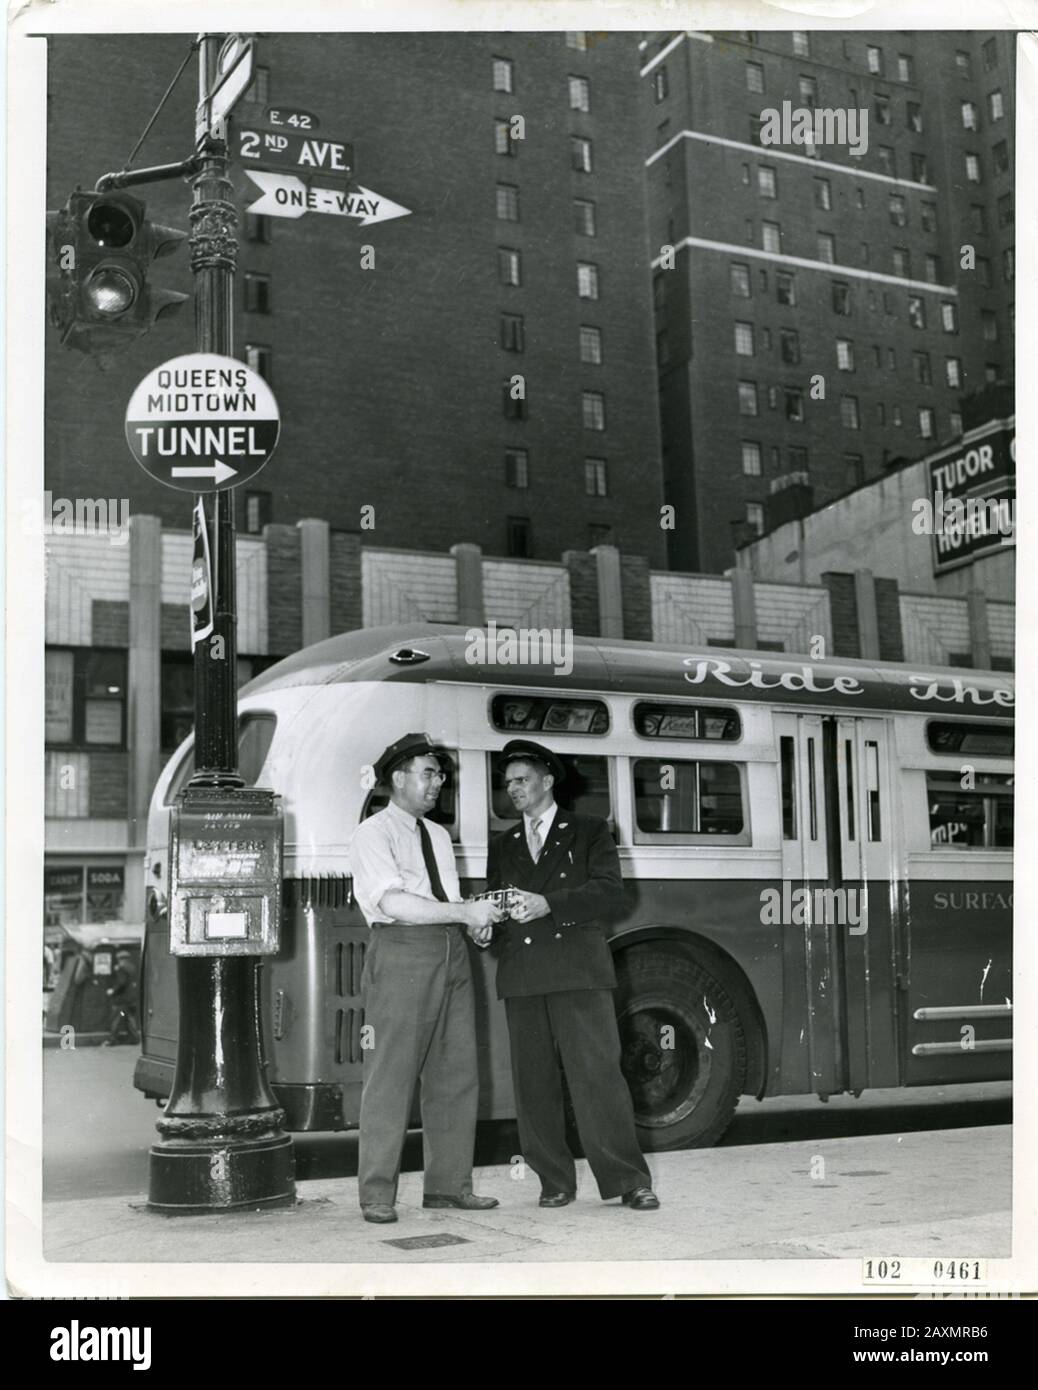 The Dutch driver Gannet (right) receives change of Peter McInerney, superintendent of the Third Avenue Railway System, at the corner of 42nd Street and 2nd Avenue in New York. Van Gent is a New York bus boards / The Dutch Bus driver Gannet (right) Receives change of Peter Mclnerney, inspector of the Third Avenue Railway System, on the corner of 42nd Street and 2nd Avenue in New York for a month. Ghent will drive a New York bus during one month. Date: September 19, 1952 Filenumber 102-0461 Creator: United Press URL: http://beeldbank.nationaalarchief.nl/na:col1:dat393031 For more information abo Stock Photo